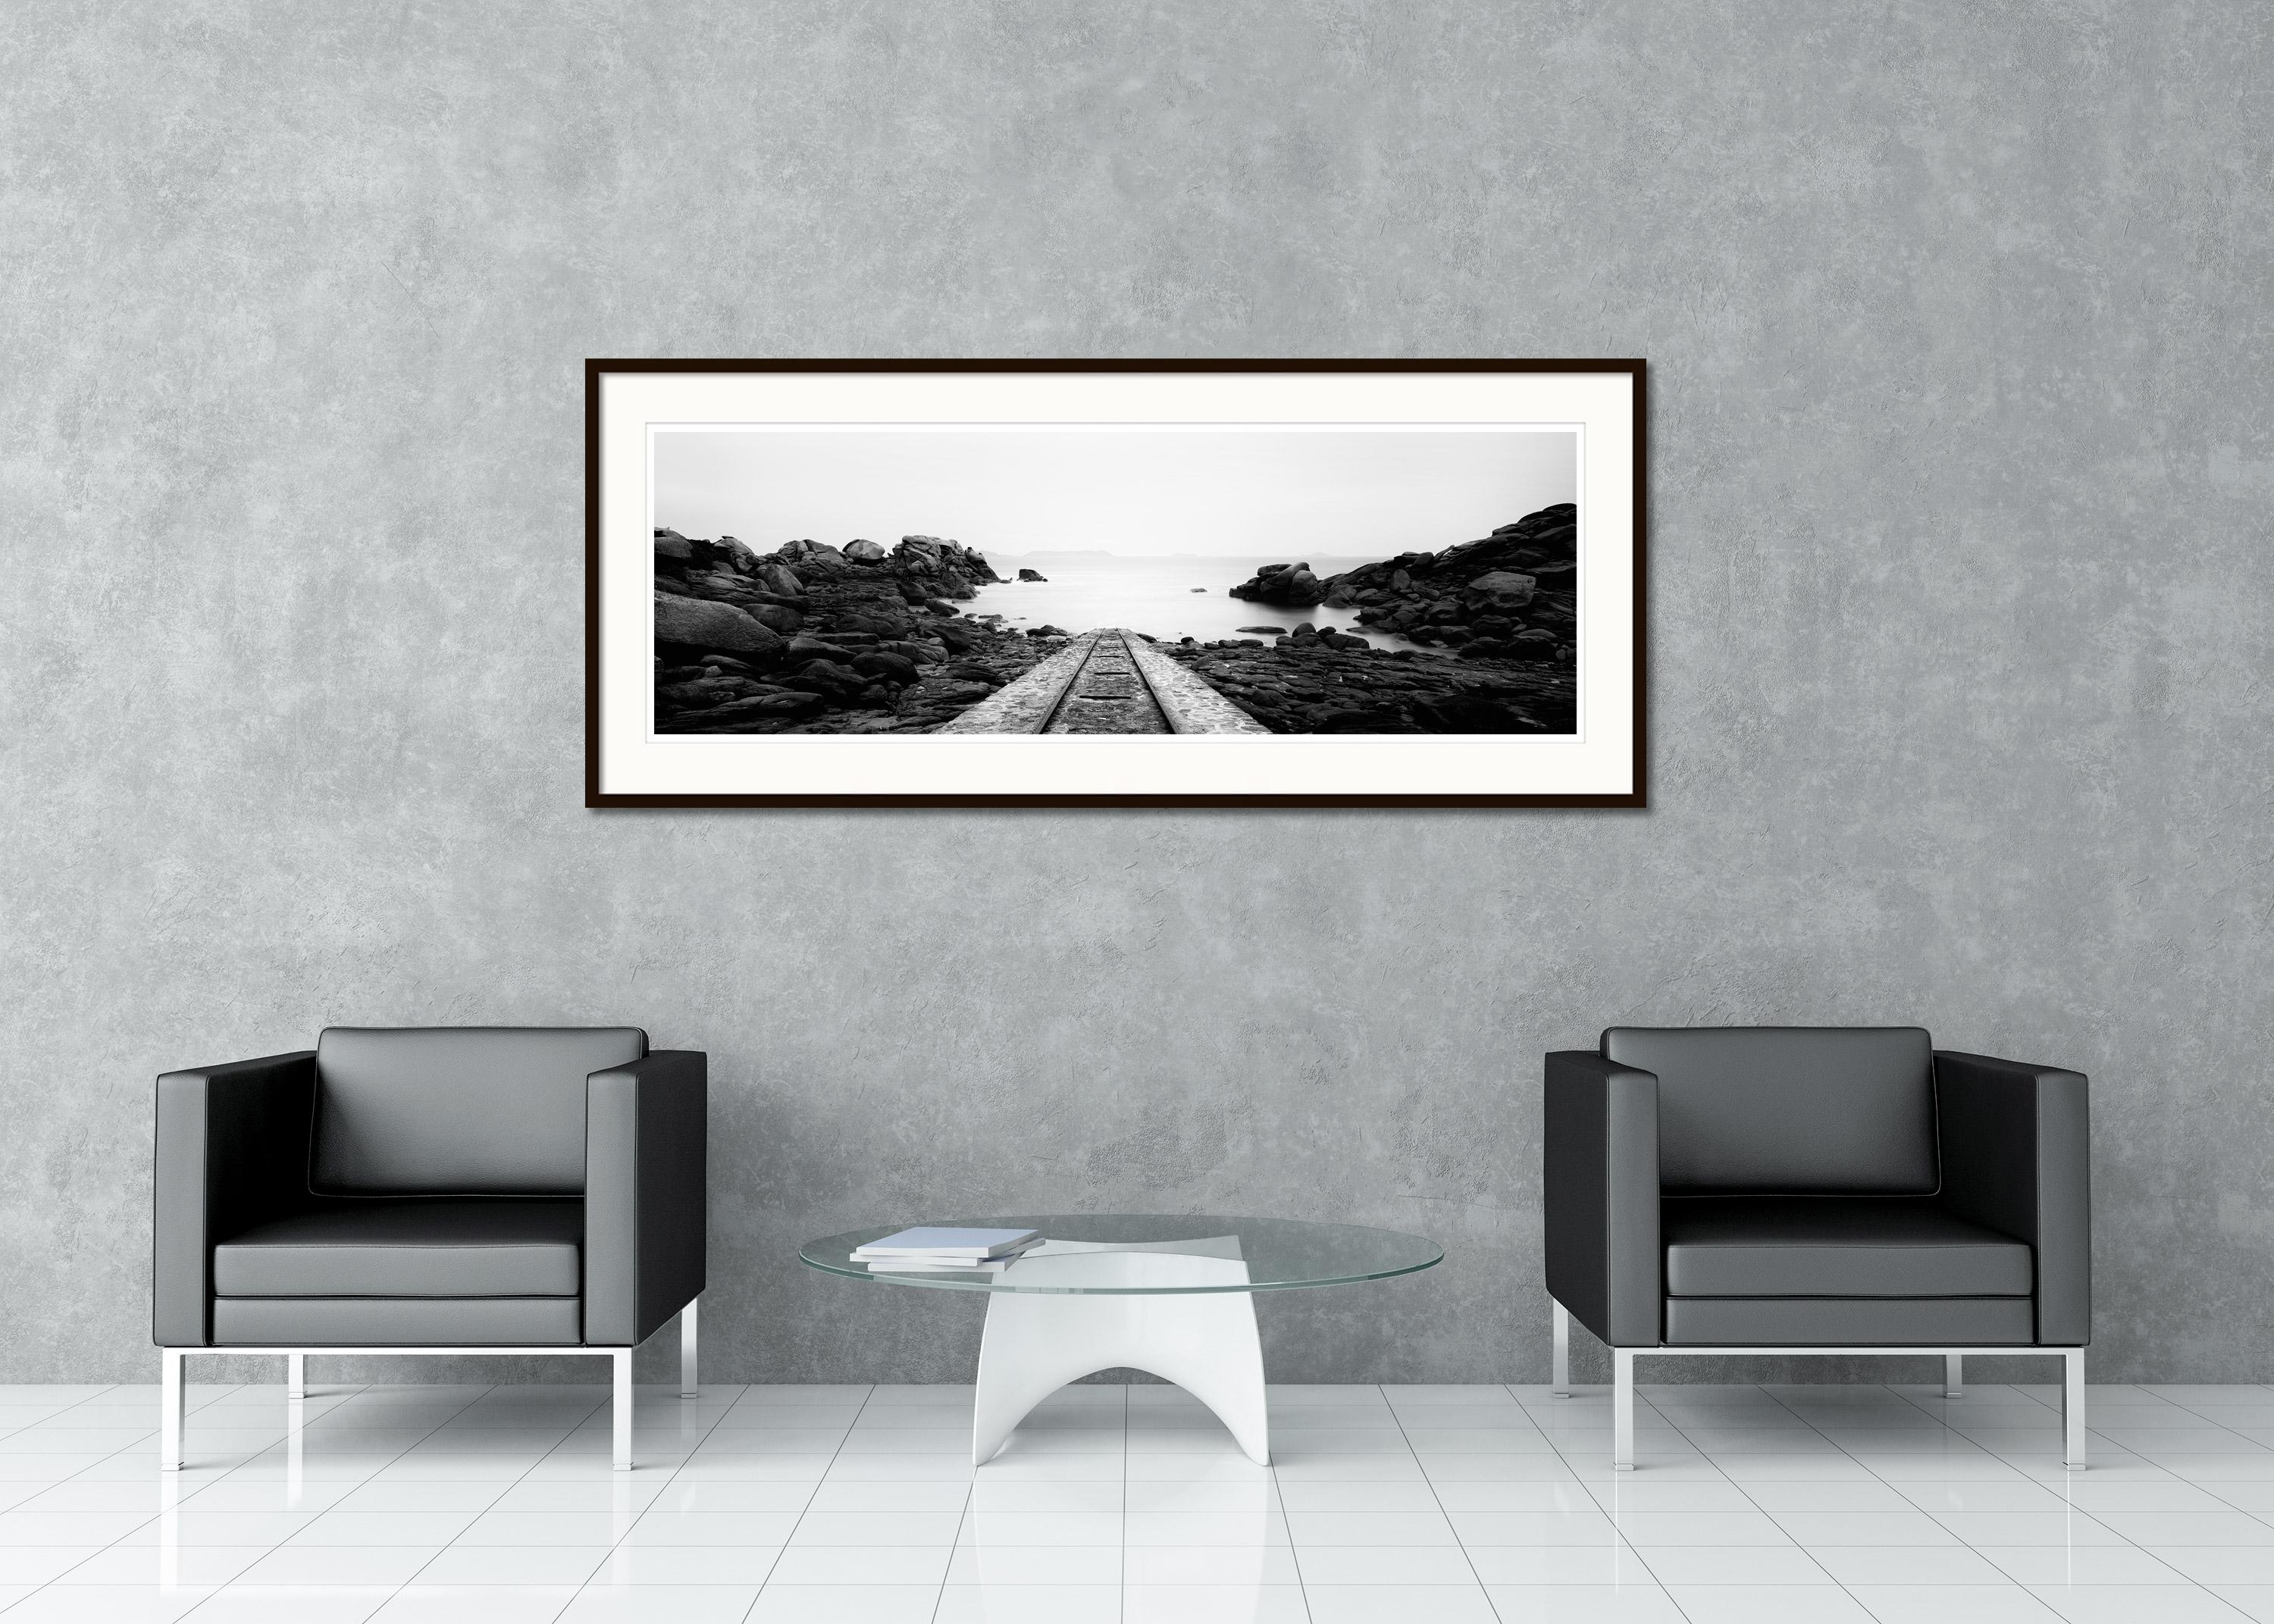 Black and white fine art long exposure panorama waterscape - landscape photography. Railway tracks in the Atlantic Ocean in France. Archival pigment ink print, edition of 9. Signed, titled, dated and numbered by artist. Certificate of authenticity